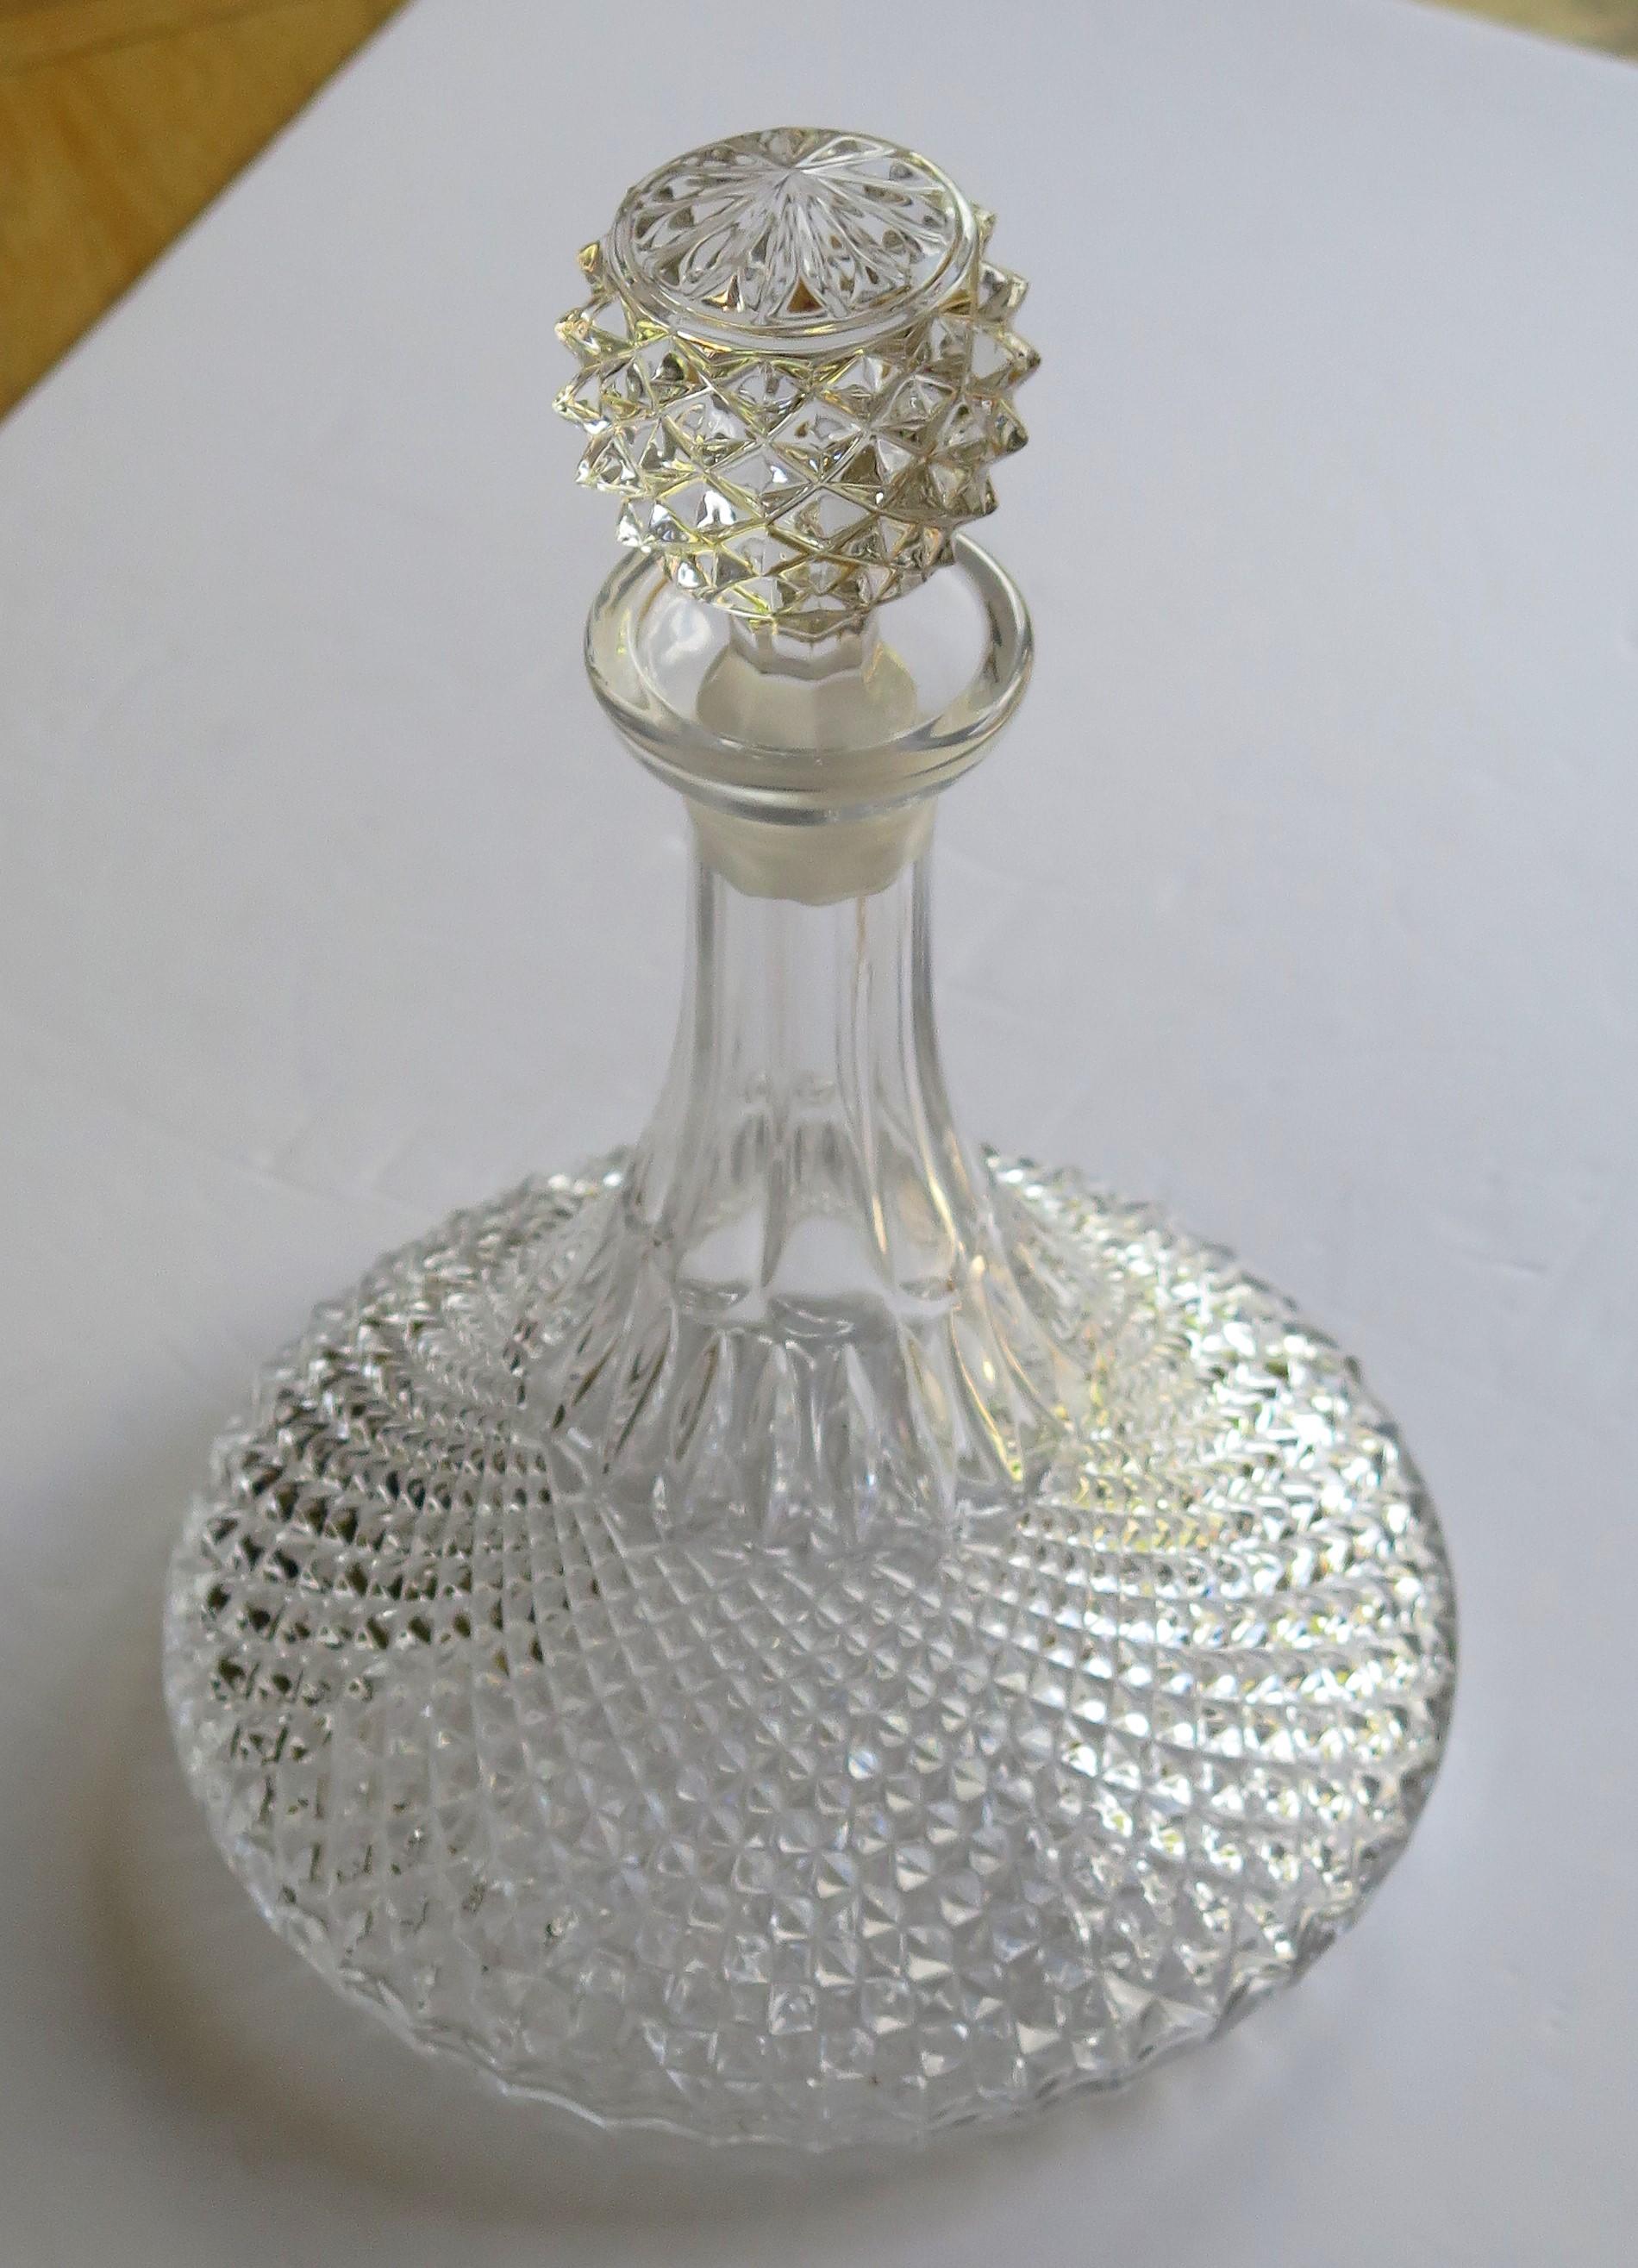 This is a high quality ship's decanter with a wide base made from heavy lead crystal or cut glass having a soft light grey color.

The decanter is diamond cut to its lower half with the diamonds graduating from the base, getting smaller towards